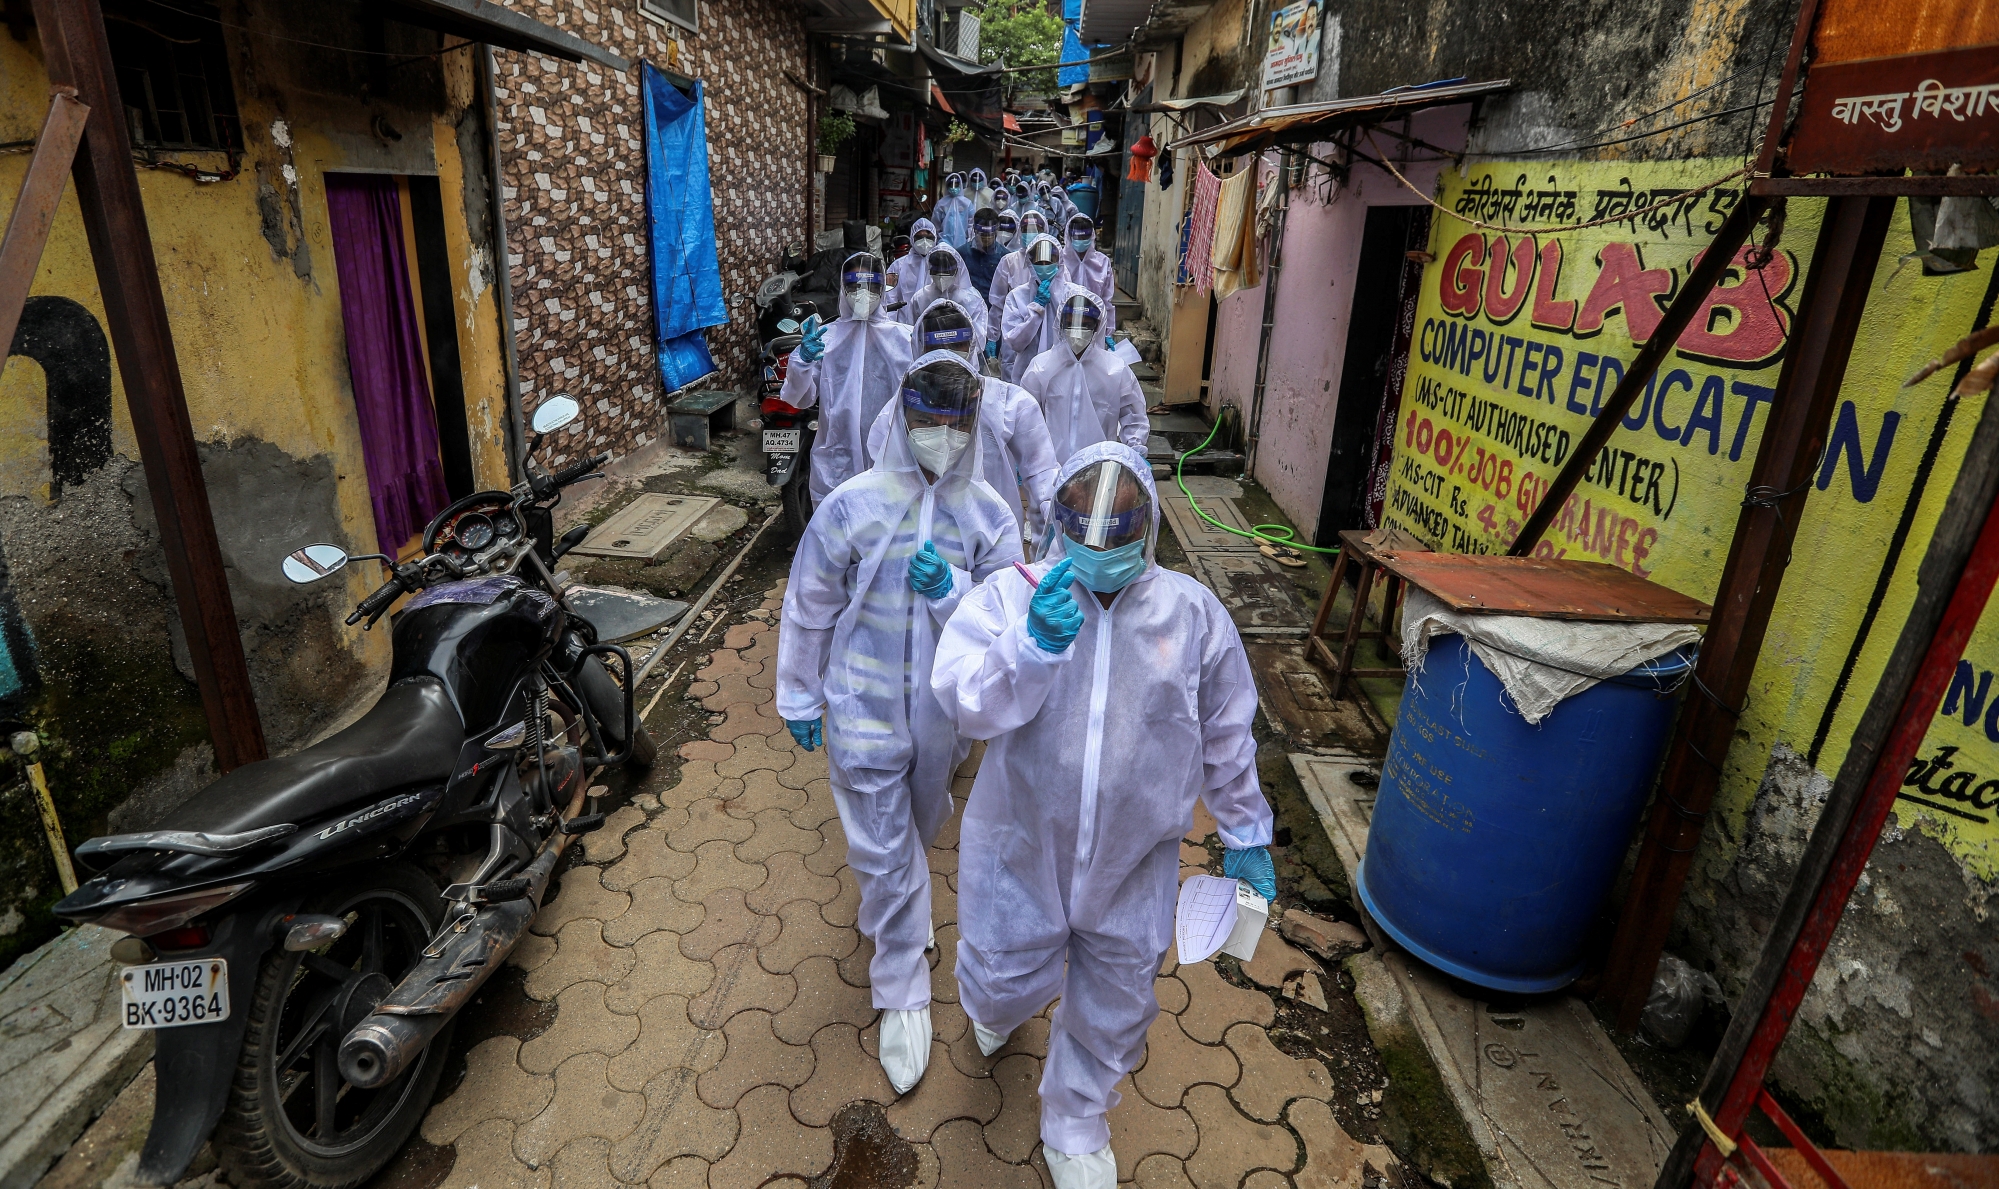 epa08514157 Indian health workers wearing personal protective equipment (PPE) arrive to carry medical checkup of the residents of a 'containment zones' in Appa Pada area, a COVID-19 hotspot, in Mumbai, India, 28 June 2020. The Indian government has eased some coronavirus related restrictions but has said the lockdown will continue until 30 June, in 'containment zones'. According to the latest reports, India has surpassed 500,000 confirmed coronavirus cases.  EPA/DIVYAKANT SOLANKI
ArcInfo